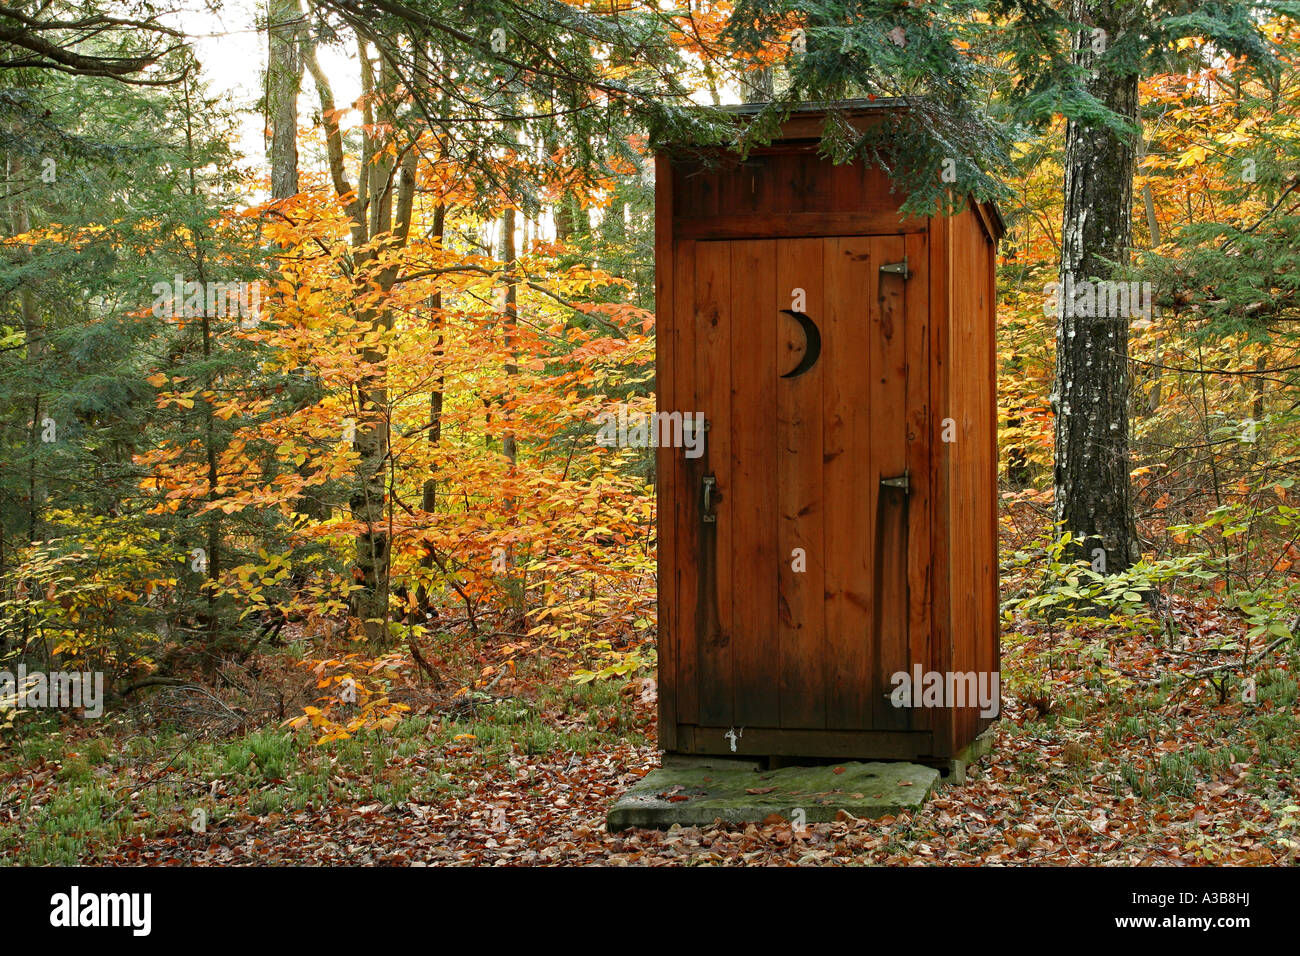 USA New Hampshire Sullivan Wooden outhouse in an autumn forest setting. Stock Photo